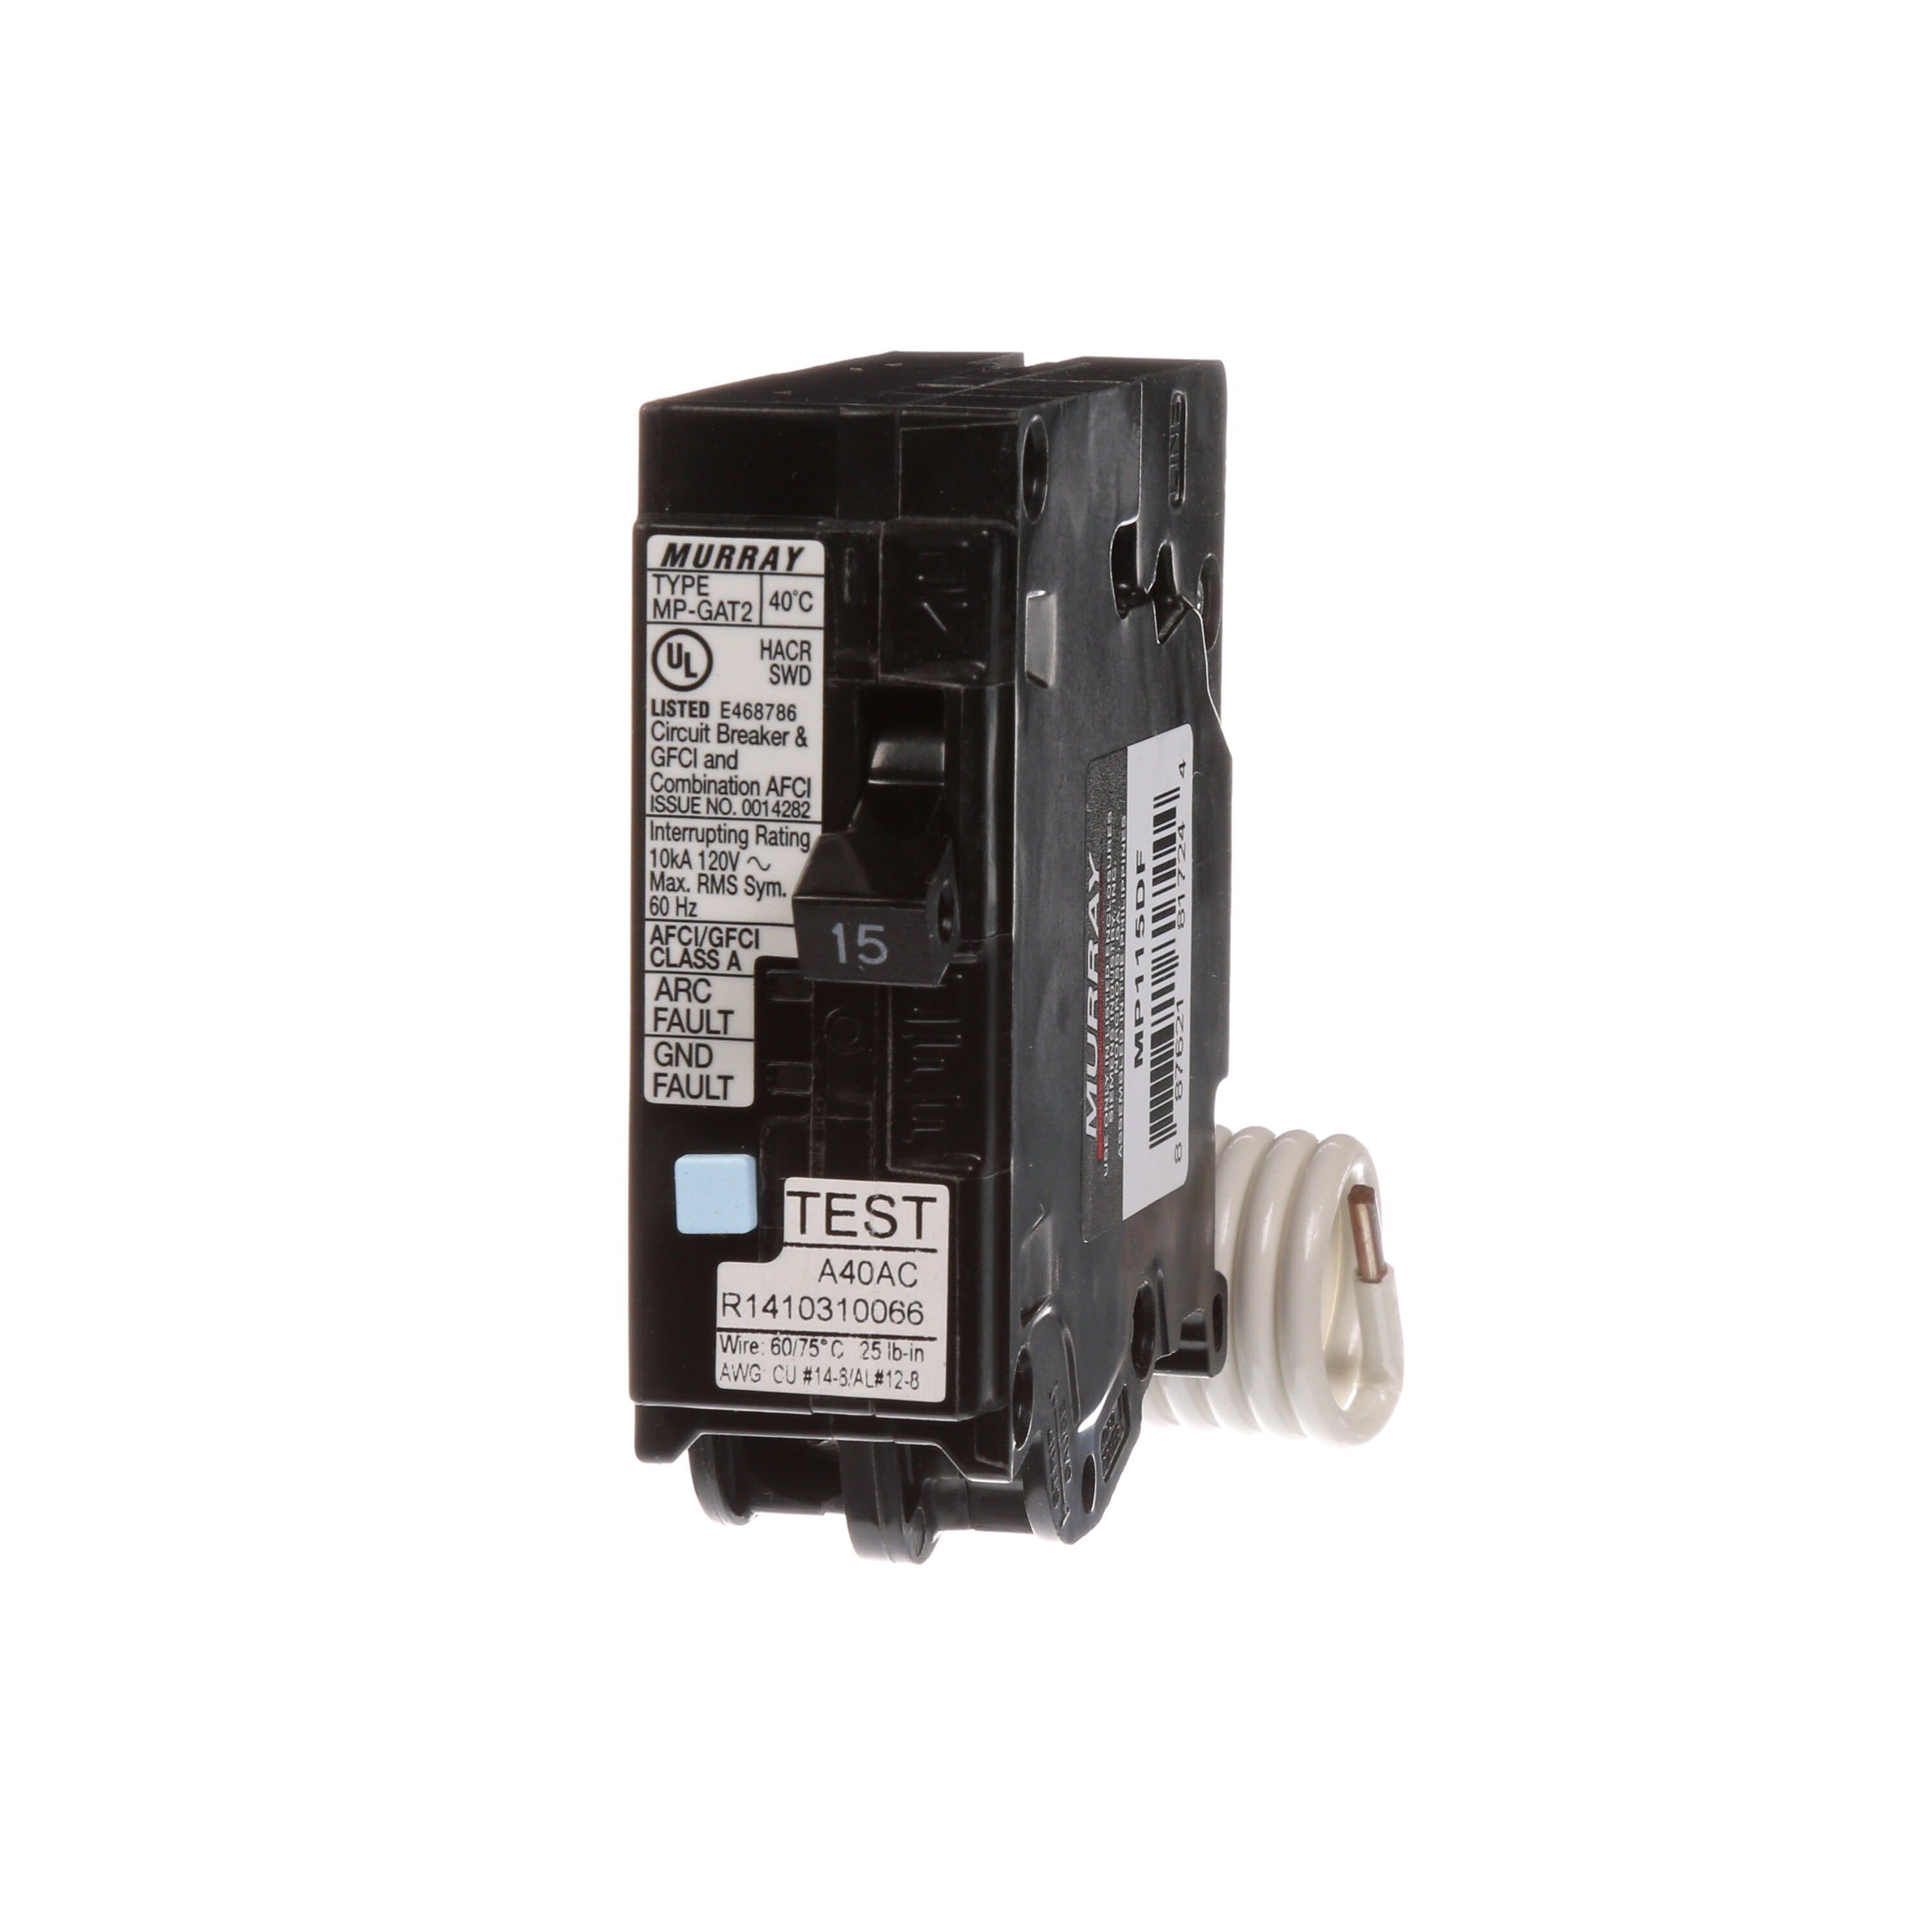 Murray MP120GF 20A Circuit Breaker for sale online 